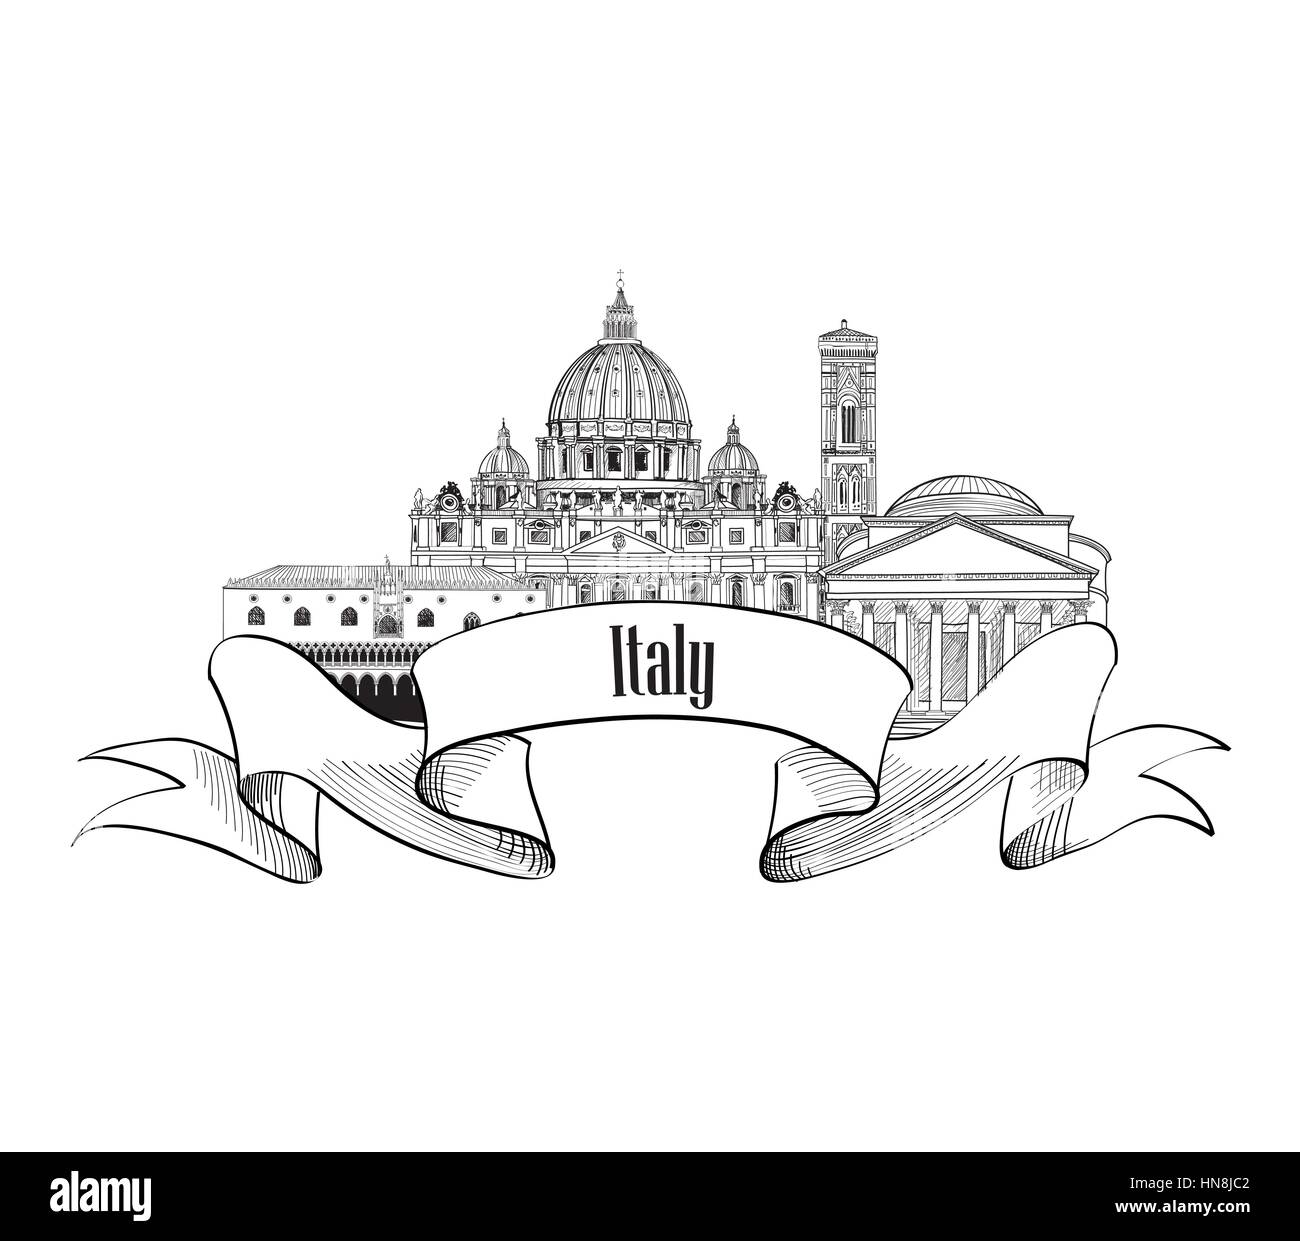 Italy architectural symbol. Trave Italy label. Italy skyline. Stock Vector